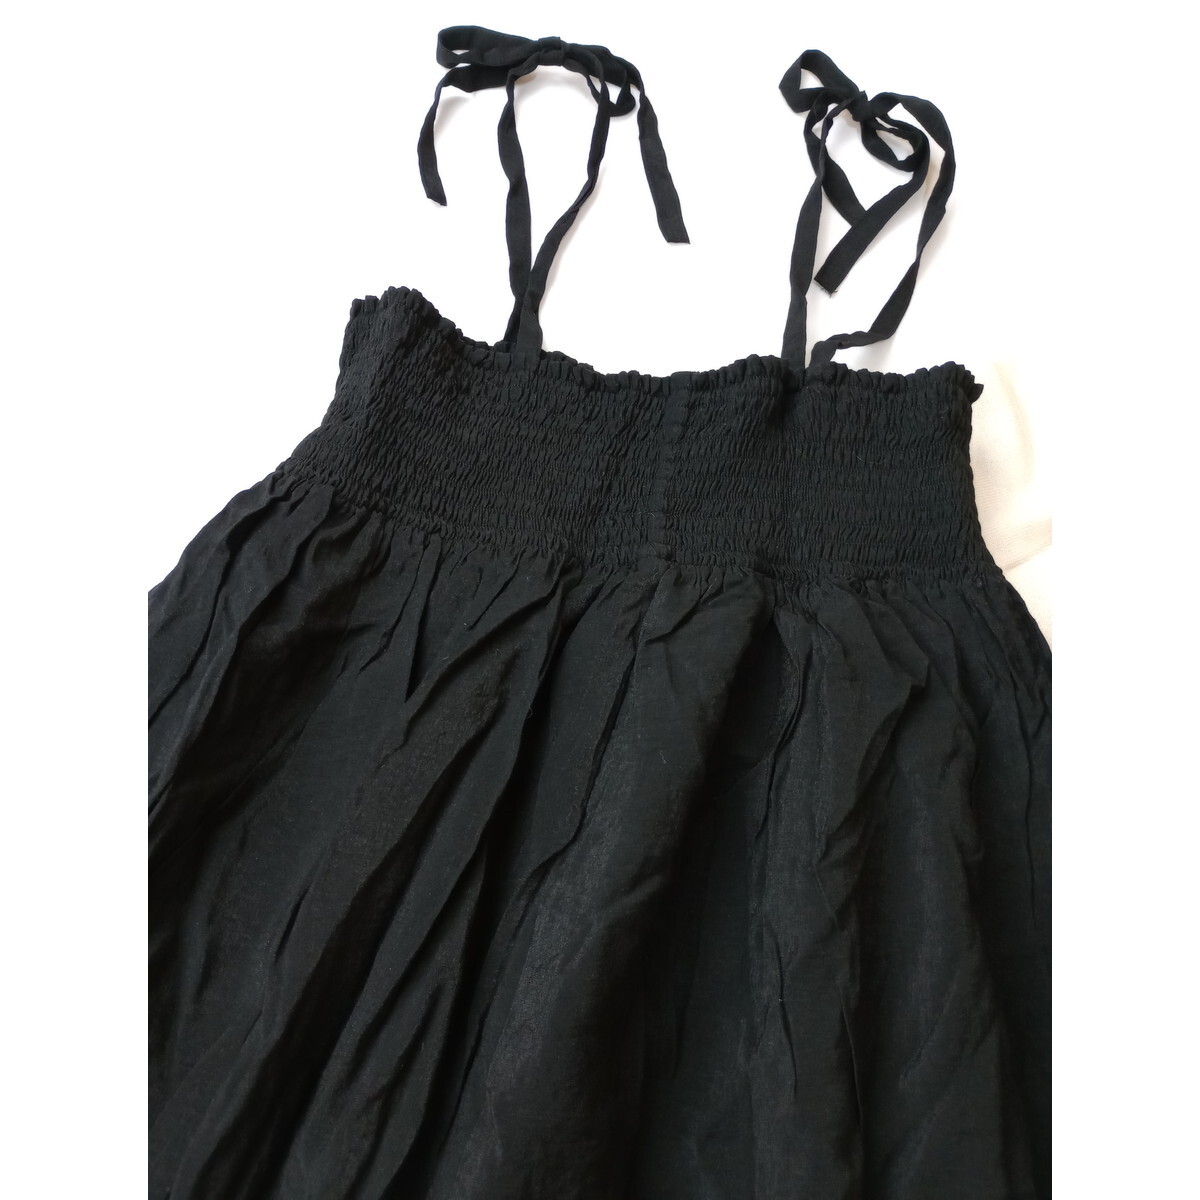 Loaf OSMOSISrof Osmosis [ seems to be, black .. still charming ] car - ring camisole switch long One-piece black black (59S+9024)